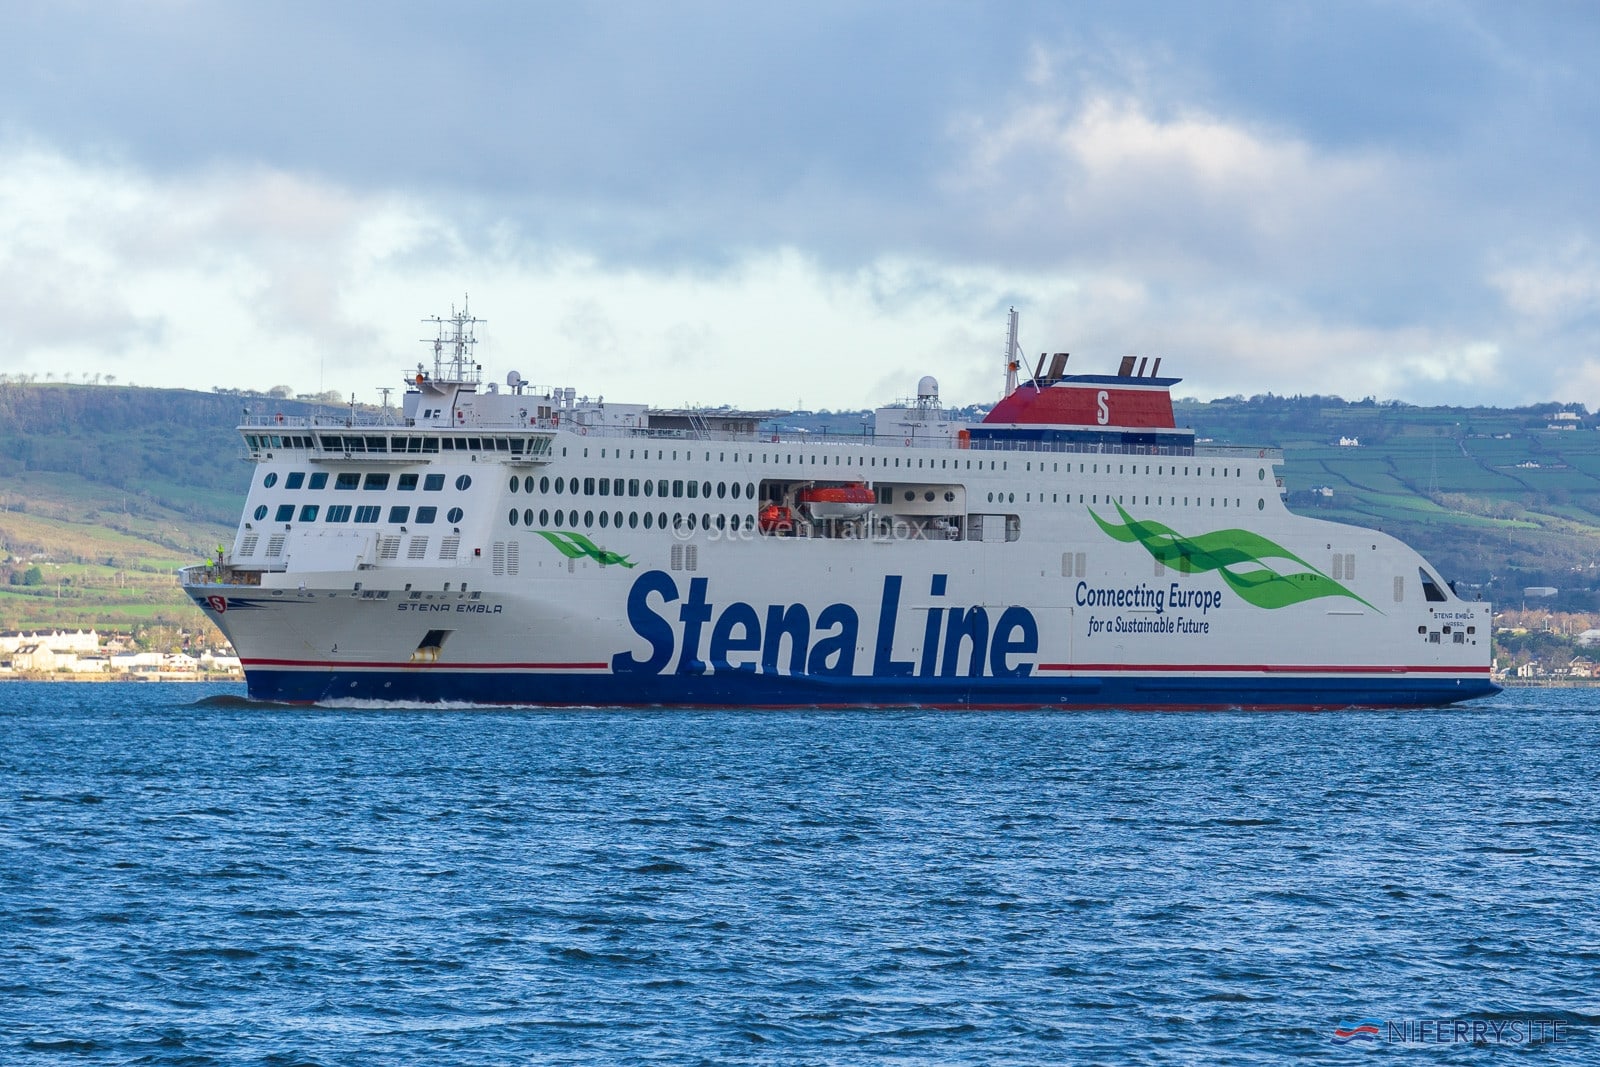 STENA EMBLA arrives at Belfast after a 6,000+ mile journey from China. Copyright © Steven Tarbox / niferry.co.uk.